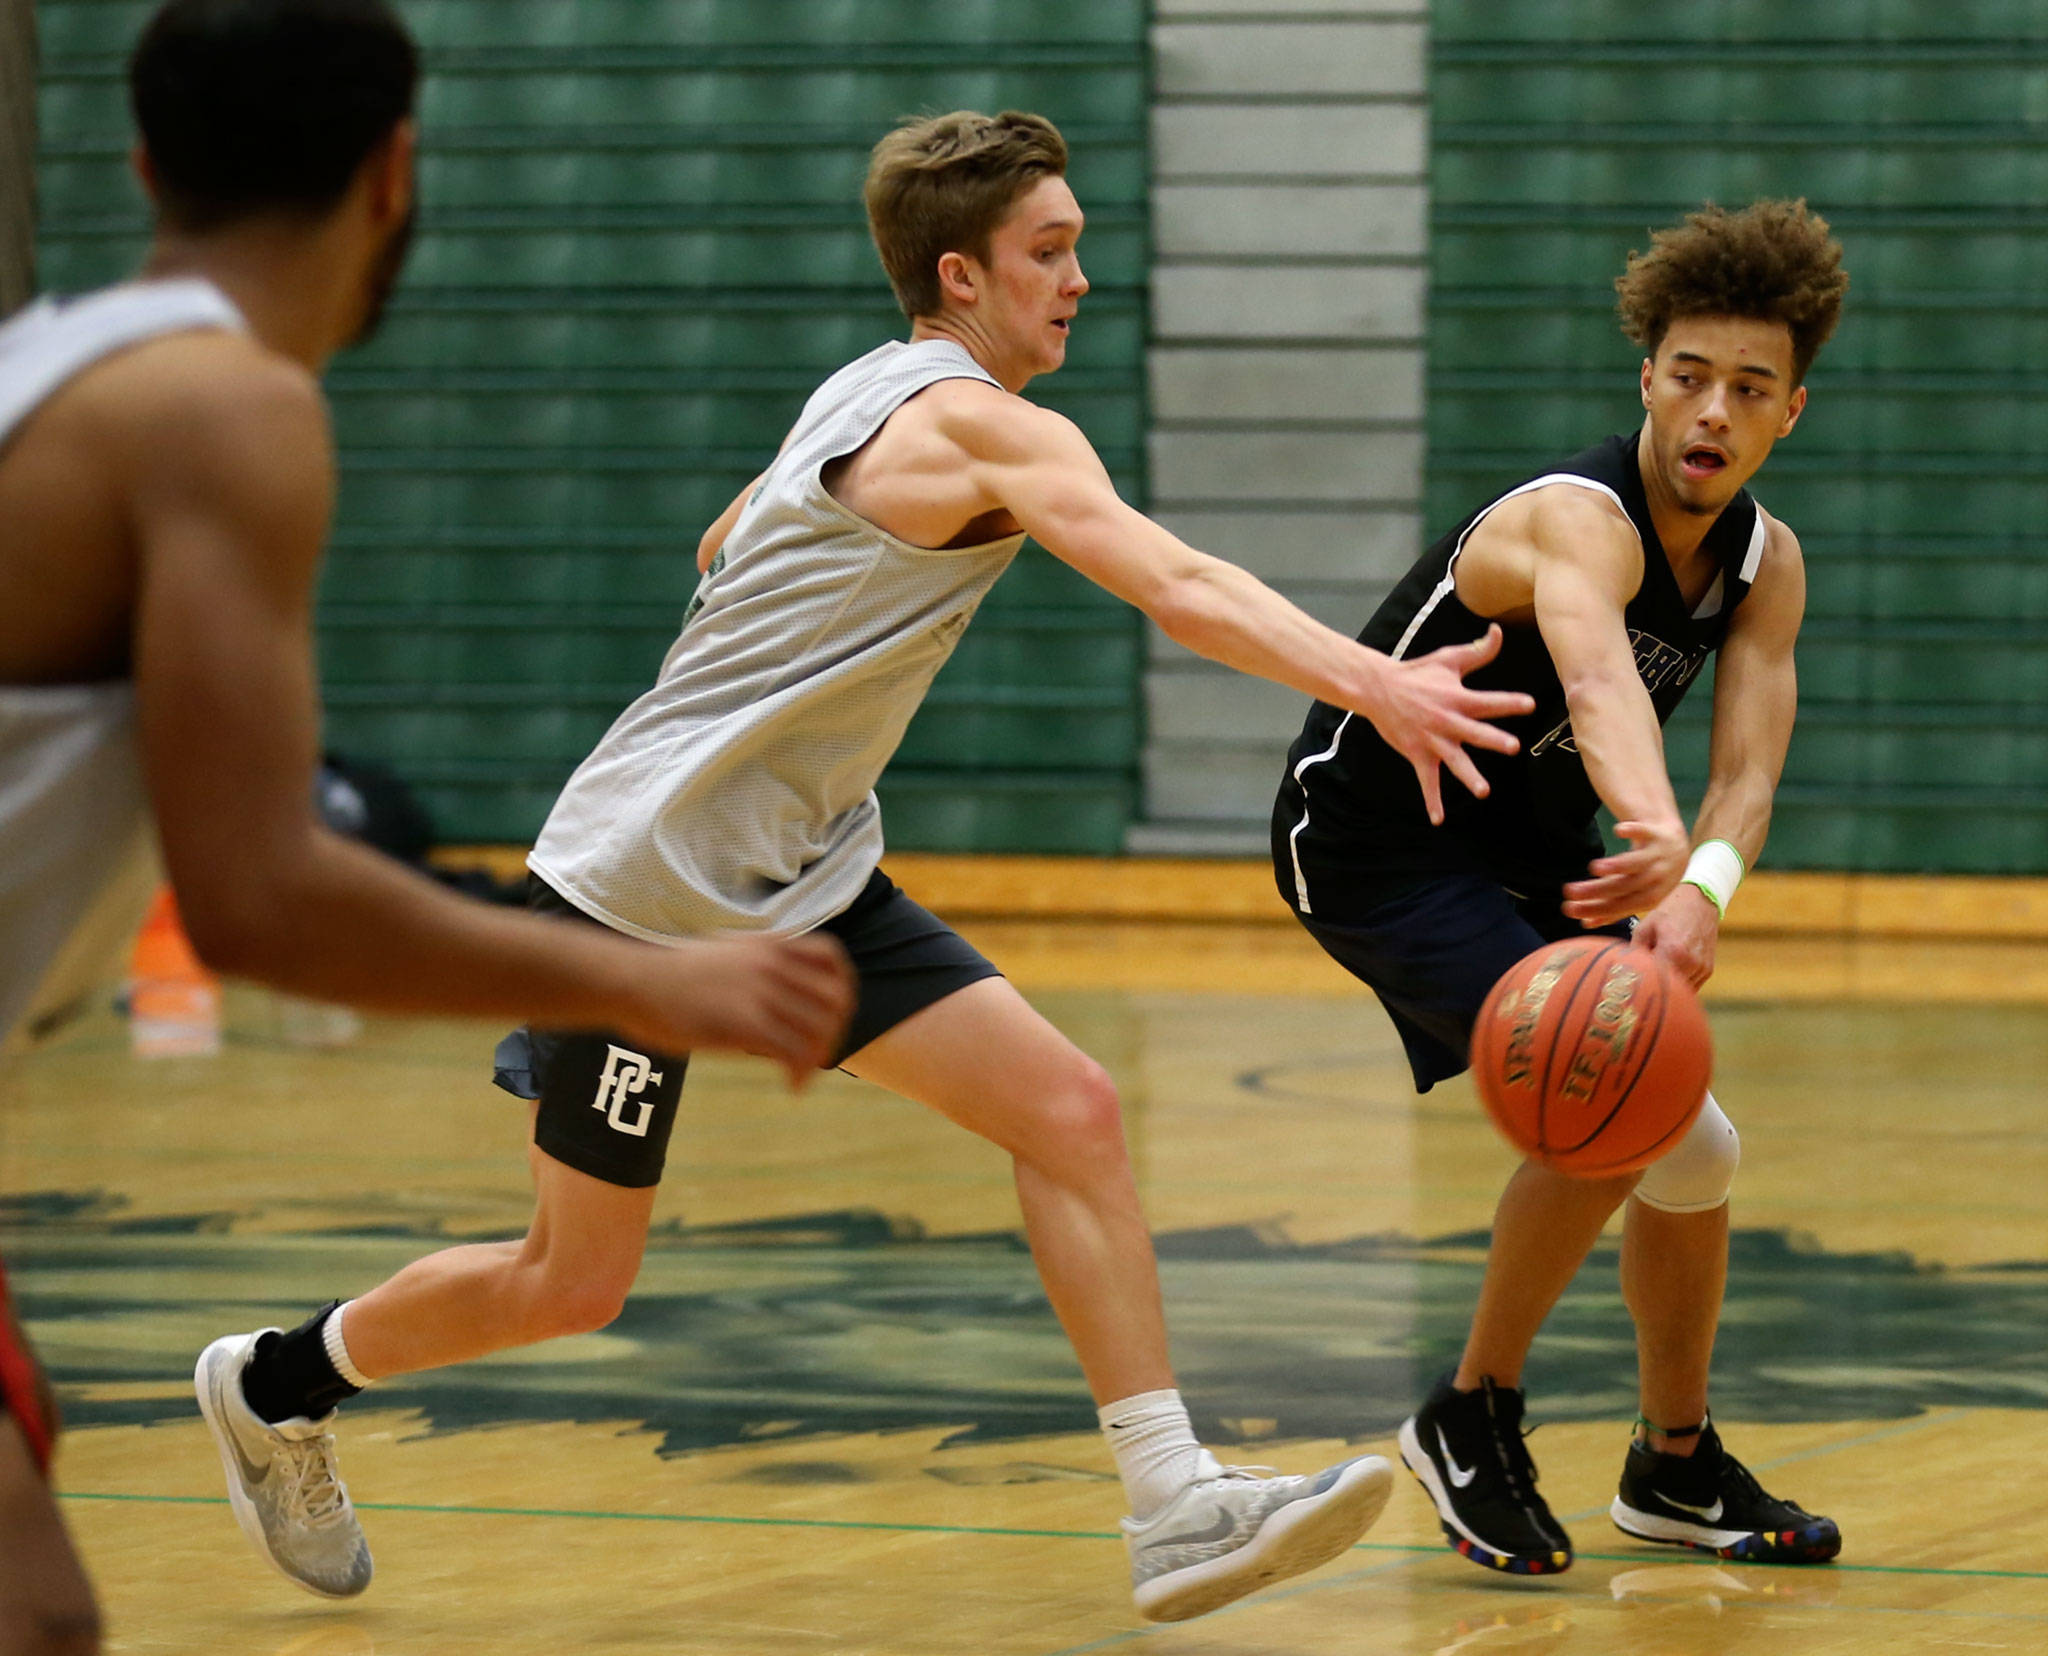 Jackson’s Christian Liddell (right) attempts a pass with Ben Olesen defending during practice on Dec. 6, 2018, at Jackson High School in Mill Creek. (Kevin Clark / The Herald)